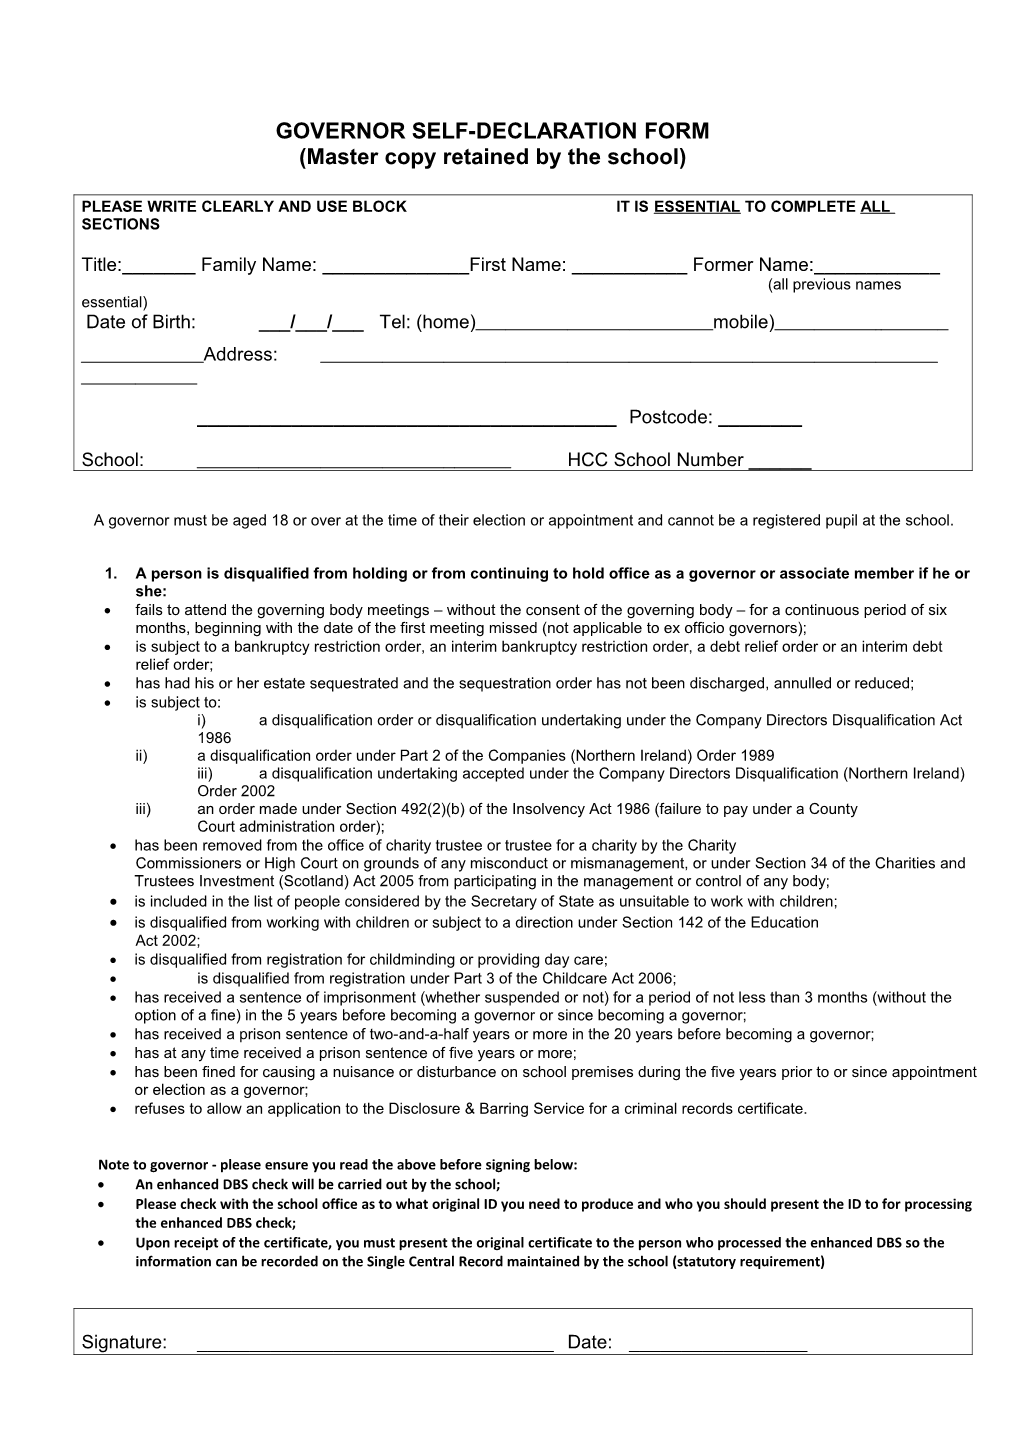 Governor Pre-Appointment Check Declaration Form